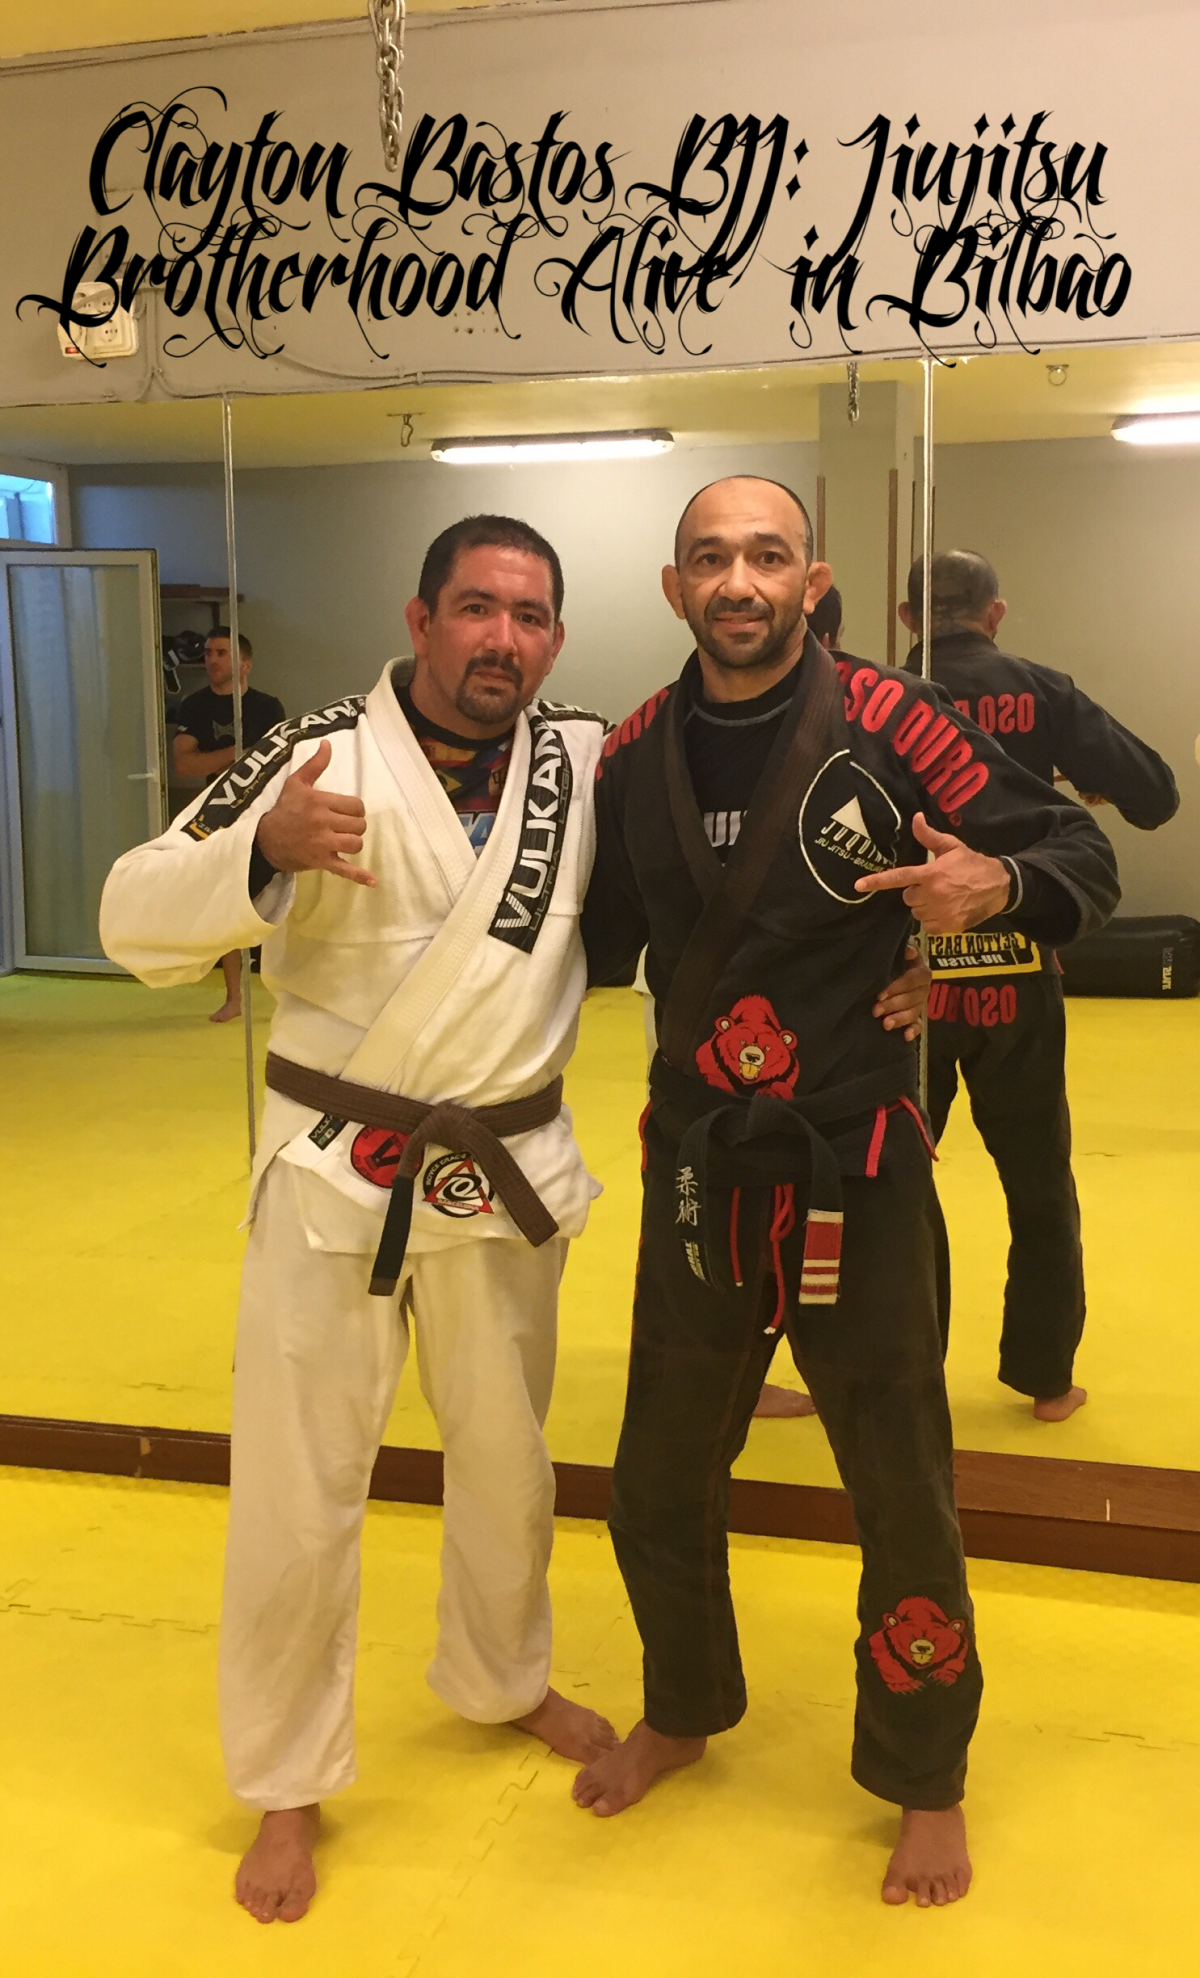 One of the nicest instructors and new Brother in BJJ I have met yet. Great on the mat, and off!